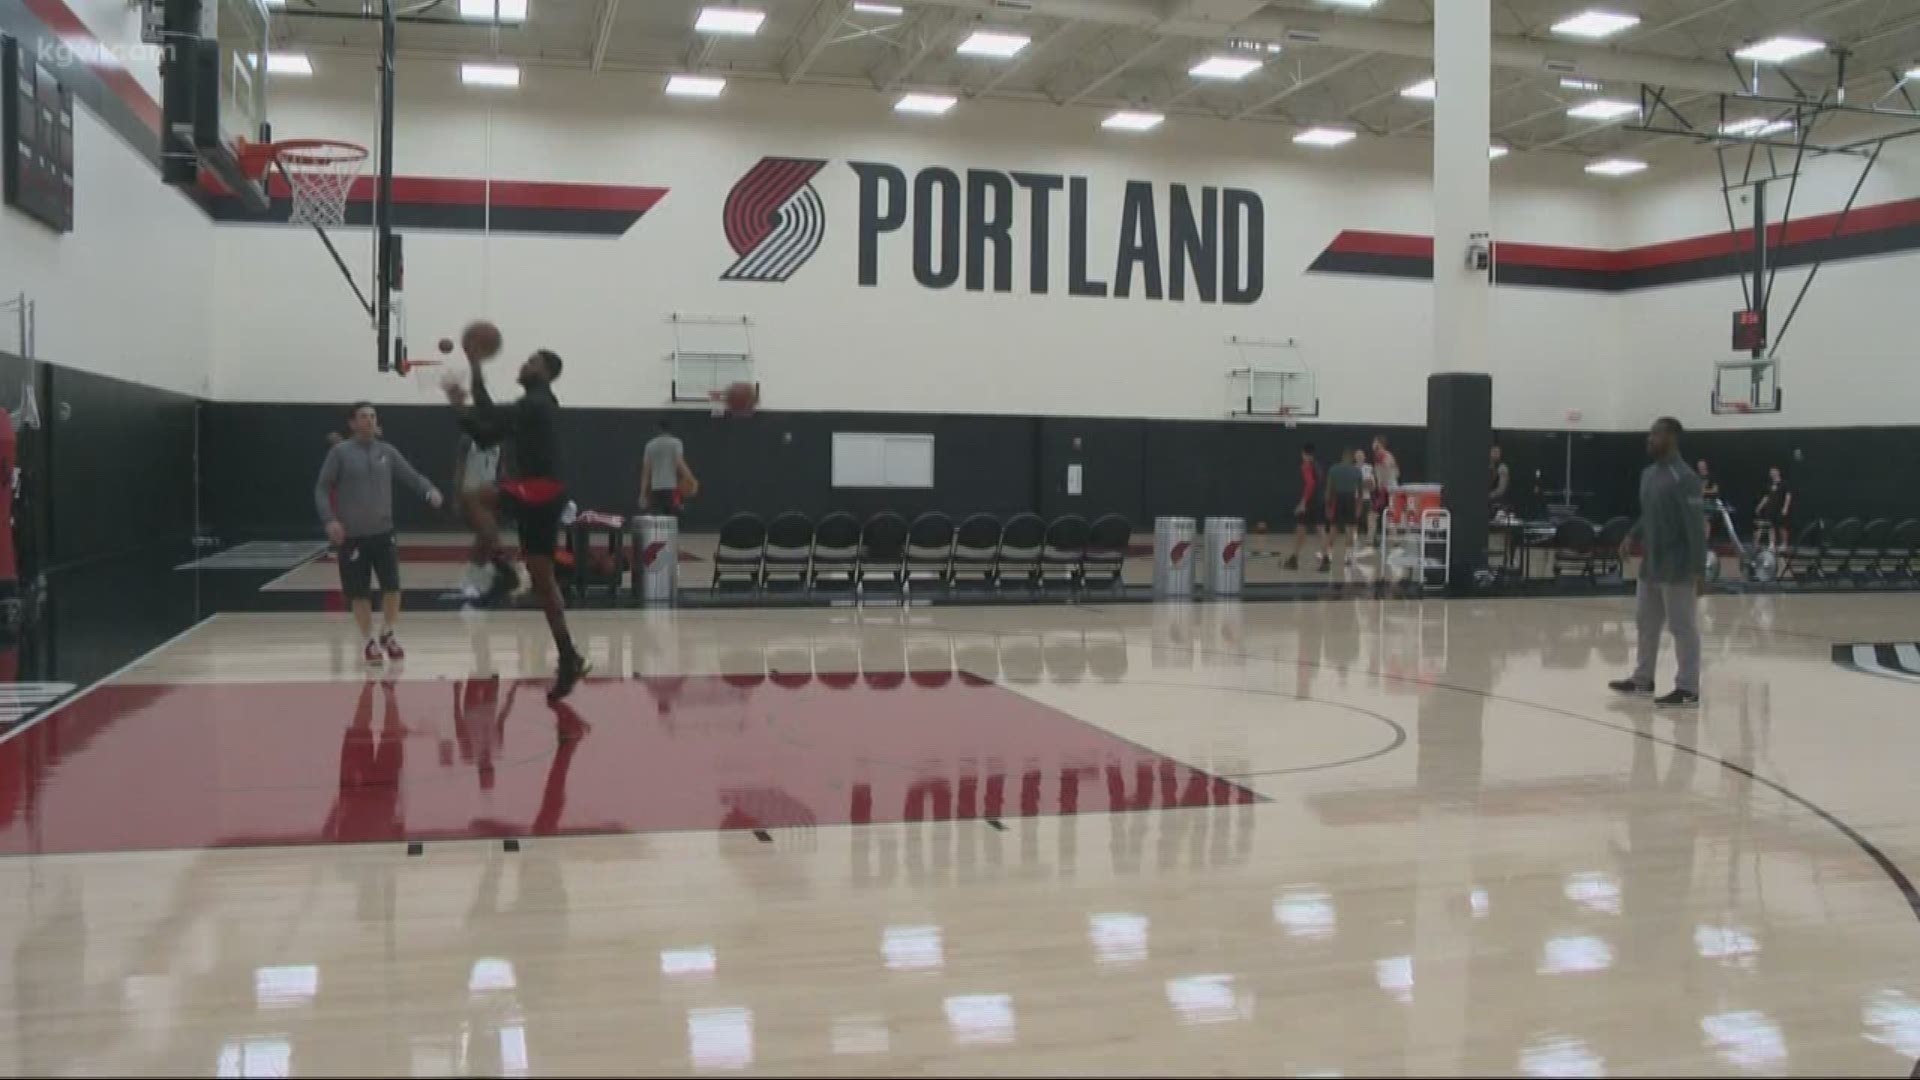 What the Blazers had to say at their first practice since defeating OKC.